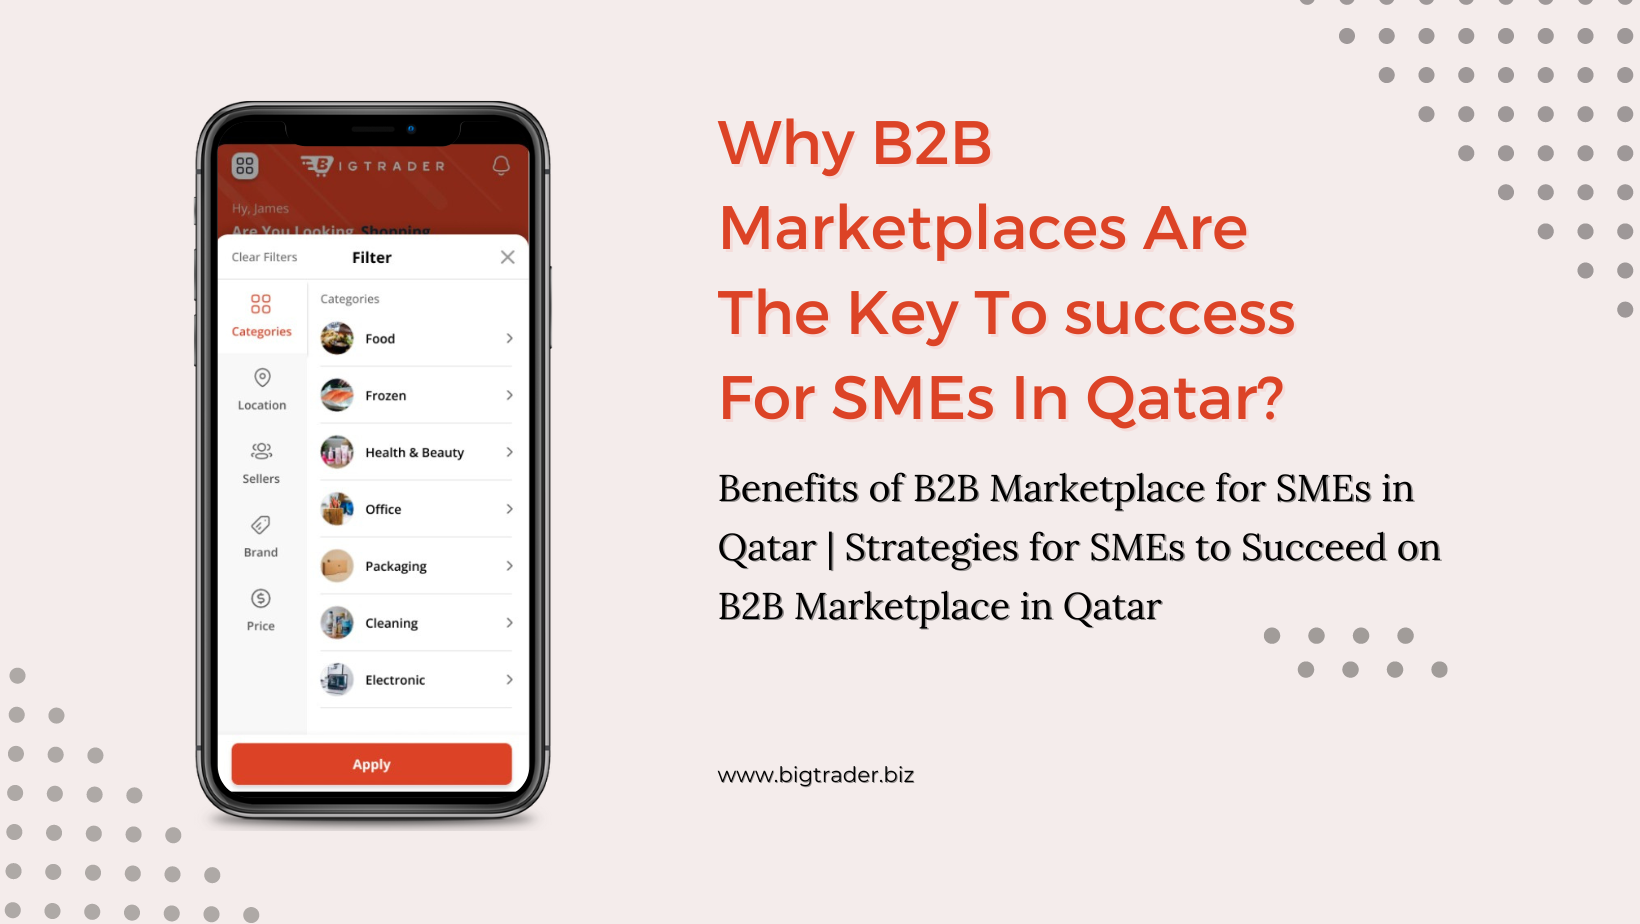 Why B2B Marketplaces Are The Key To success for SMEs In Qatar?